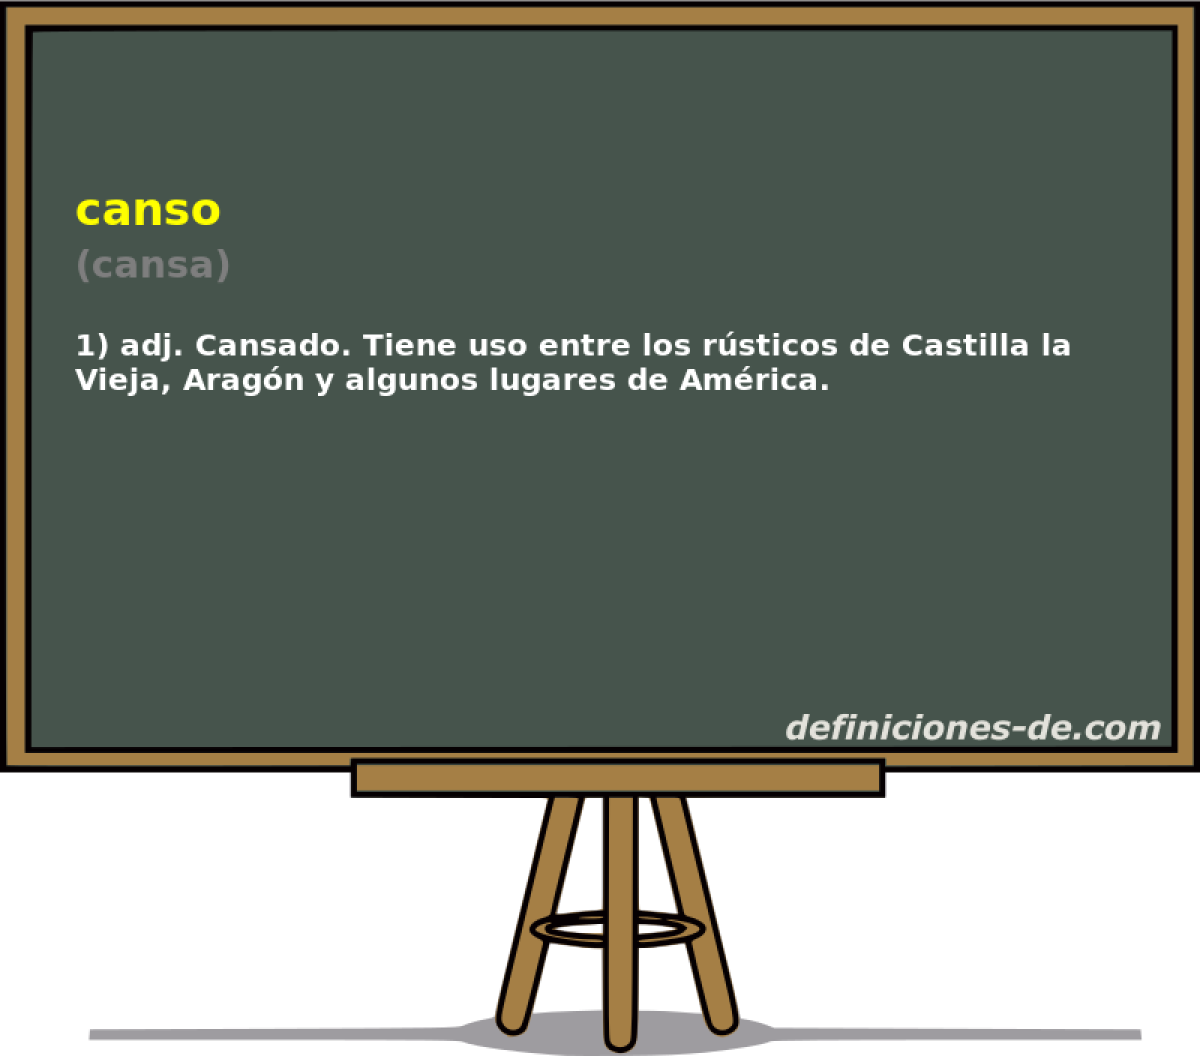 canso (cansa)